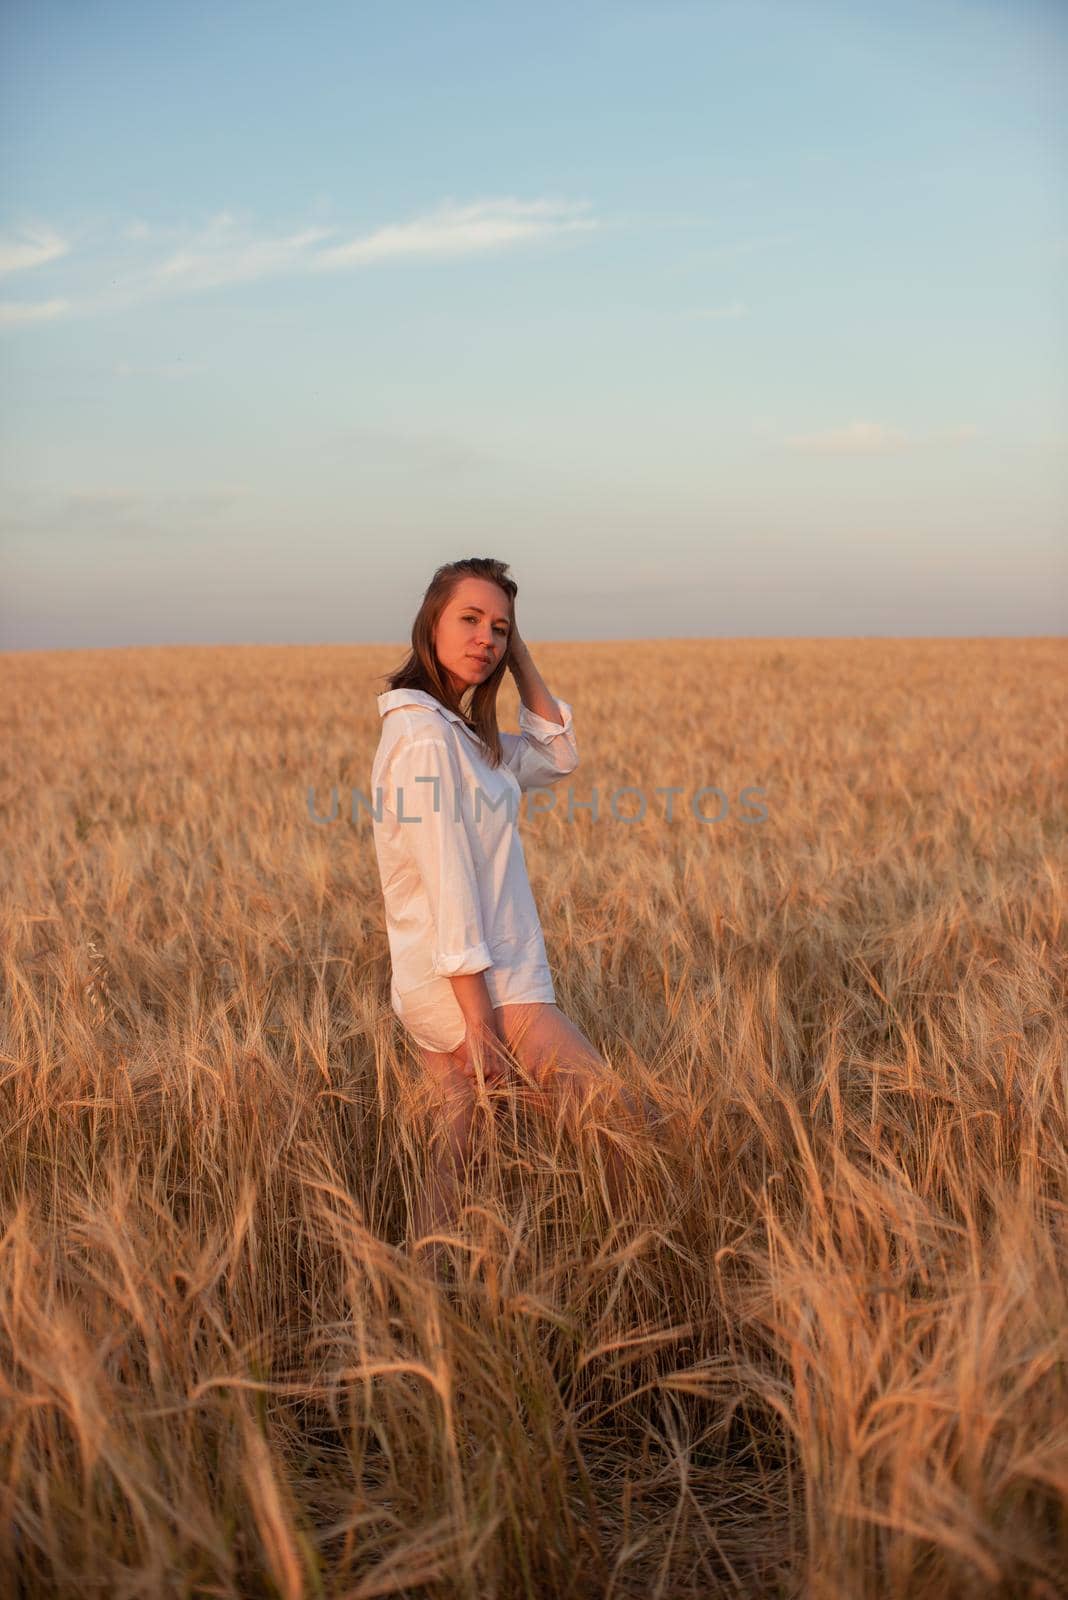 Woman in the yellow field of wheat, beauty summer sunset